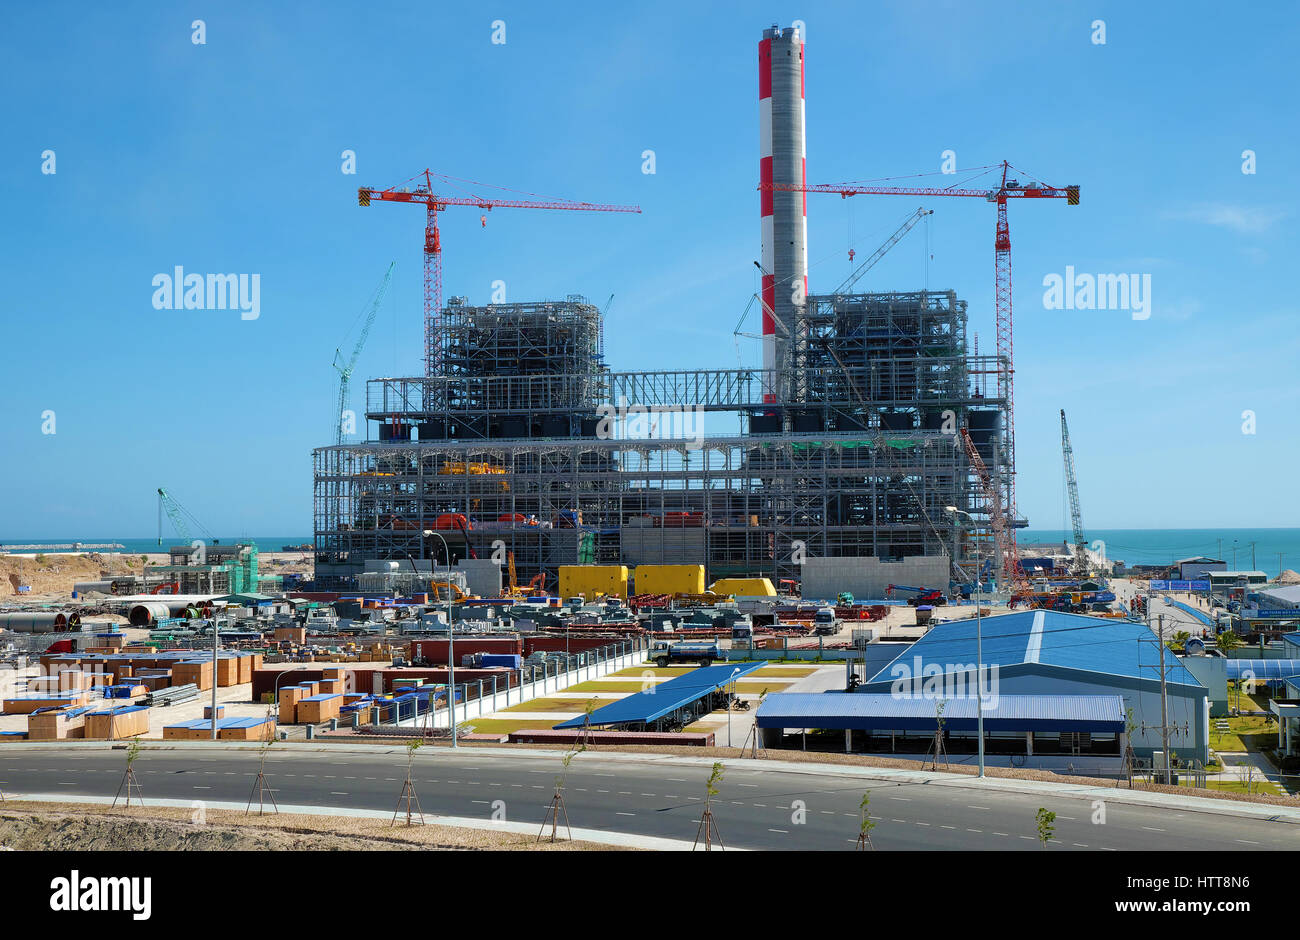 BINH THUAN, VIET NAM- FEB 1,2016: Vinh Tan thermal power plant build at Tuy Phong, Binh Thuan, energy project for industry at Vietnam Stock Photo